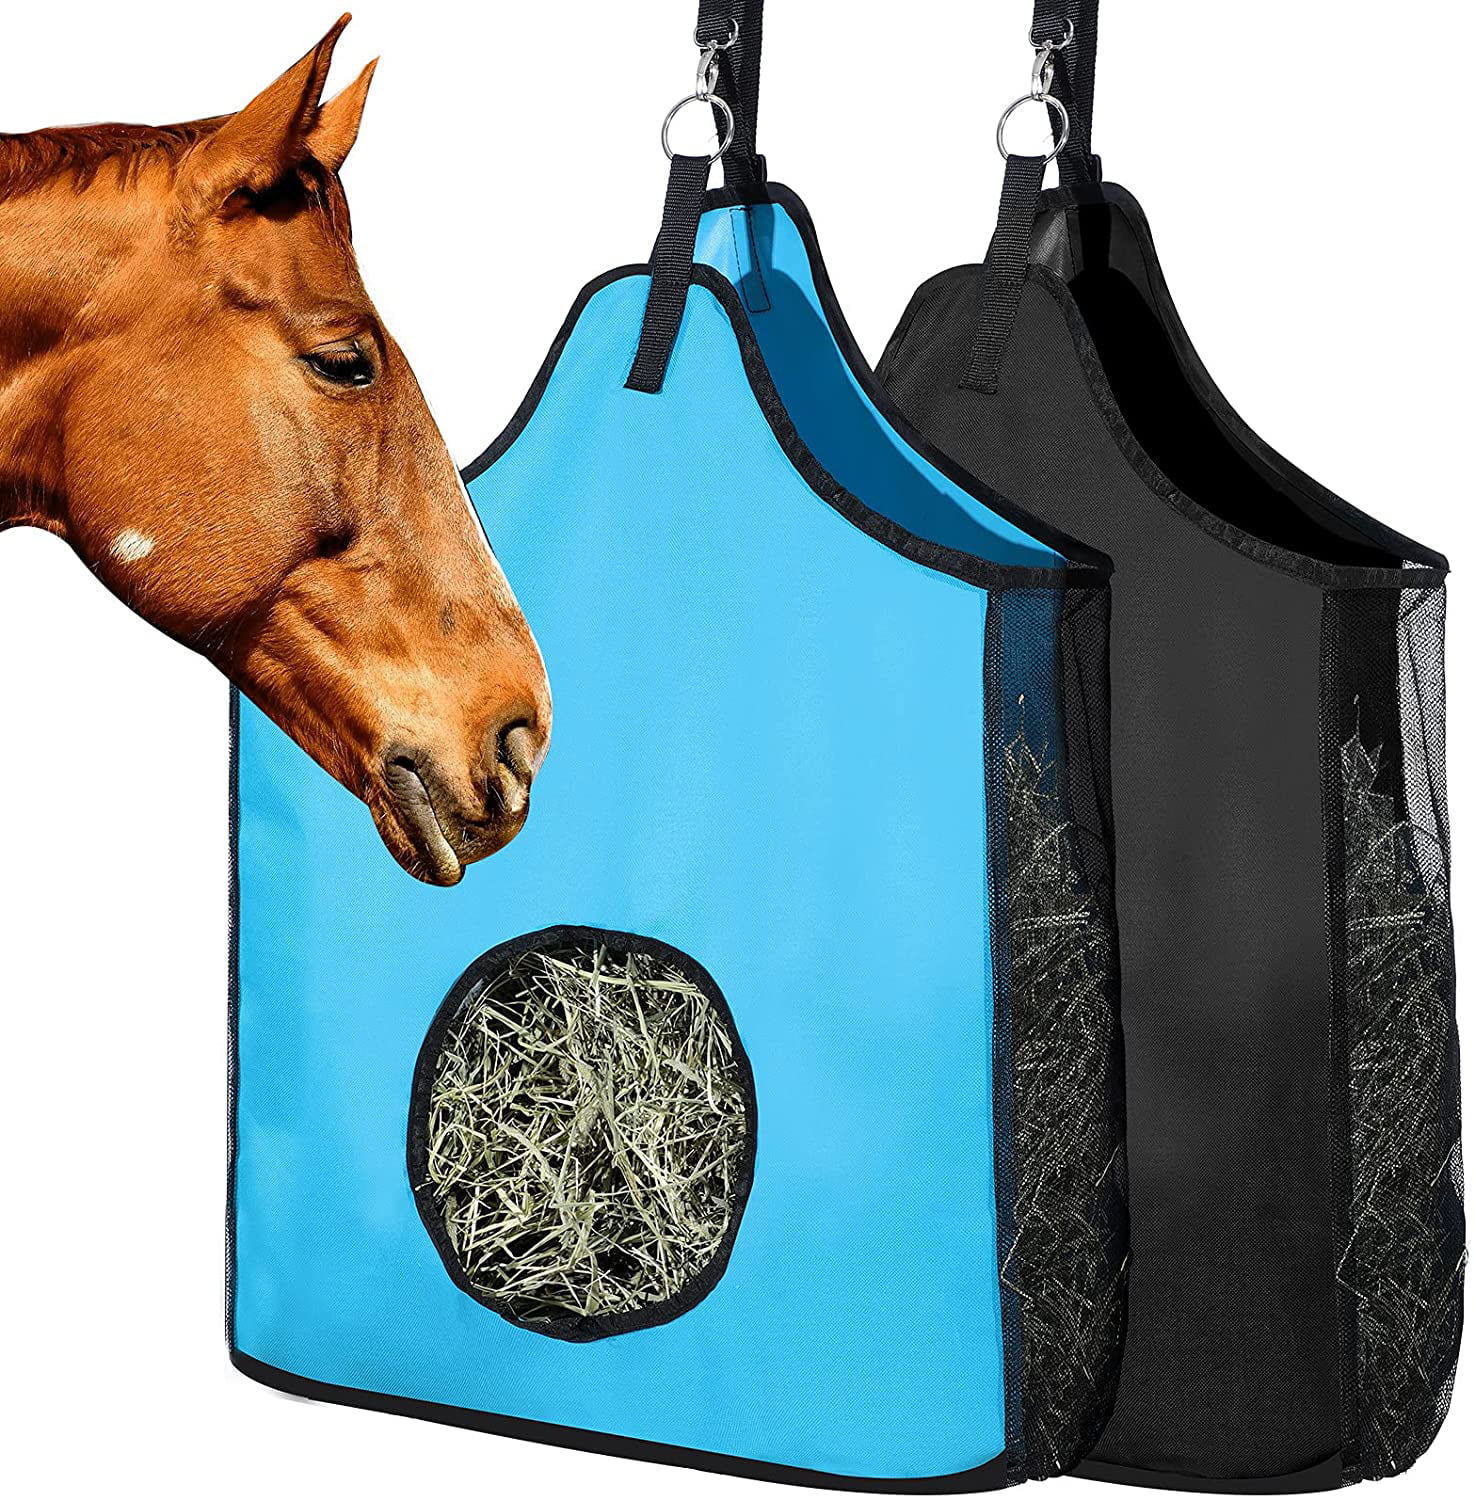 2 Pieces Horse Hay Bag Large Feeding Hay Bag 600D Nylon Horse Hay Tote Bag Horse Feeder Sack Storage Bag with Metal Rings for Horse Sheep Cow Goats 